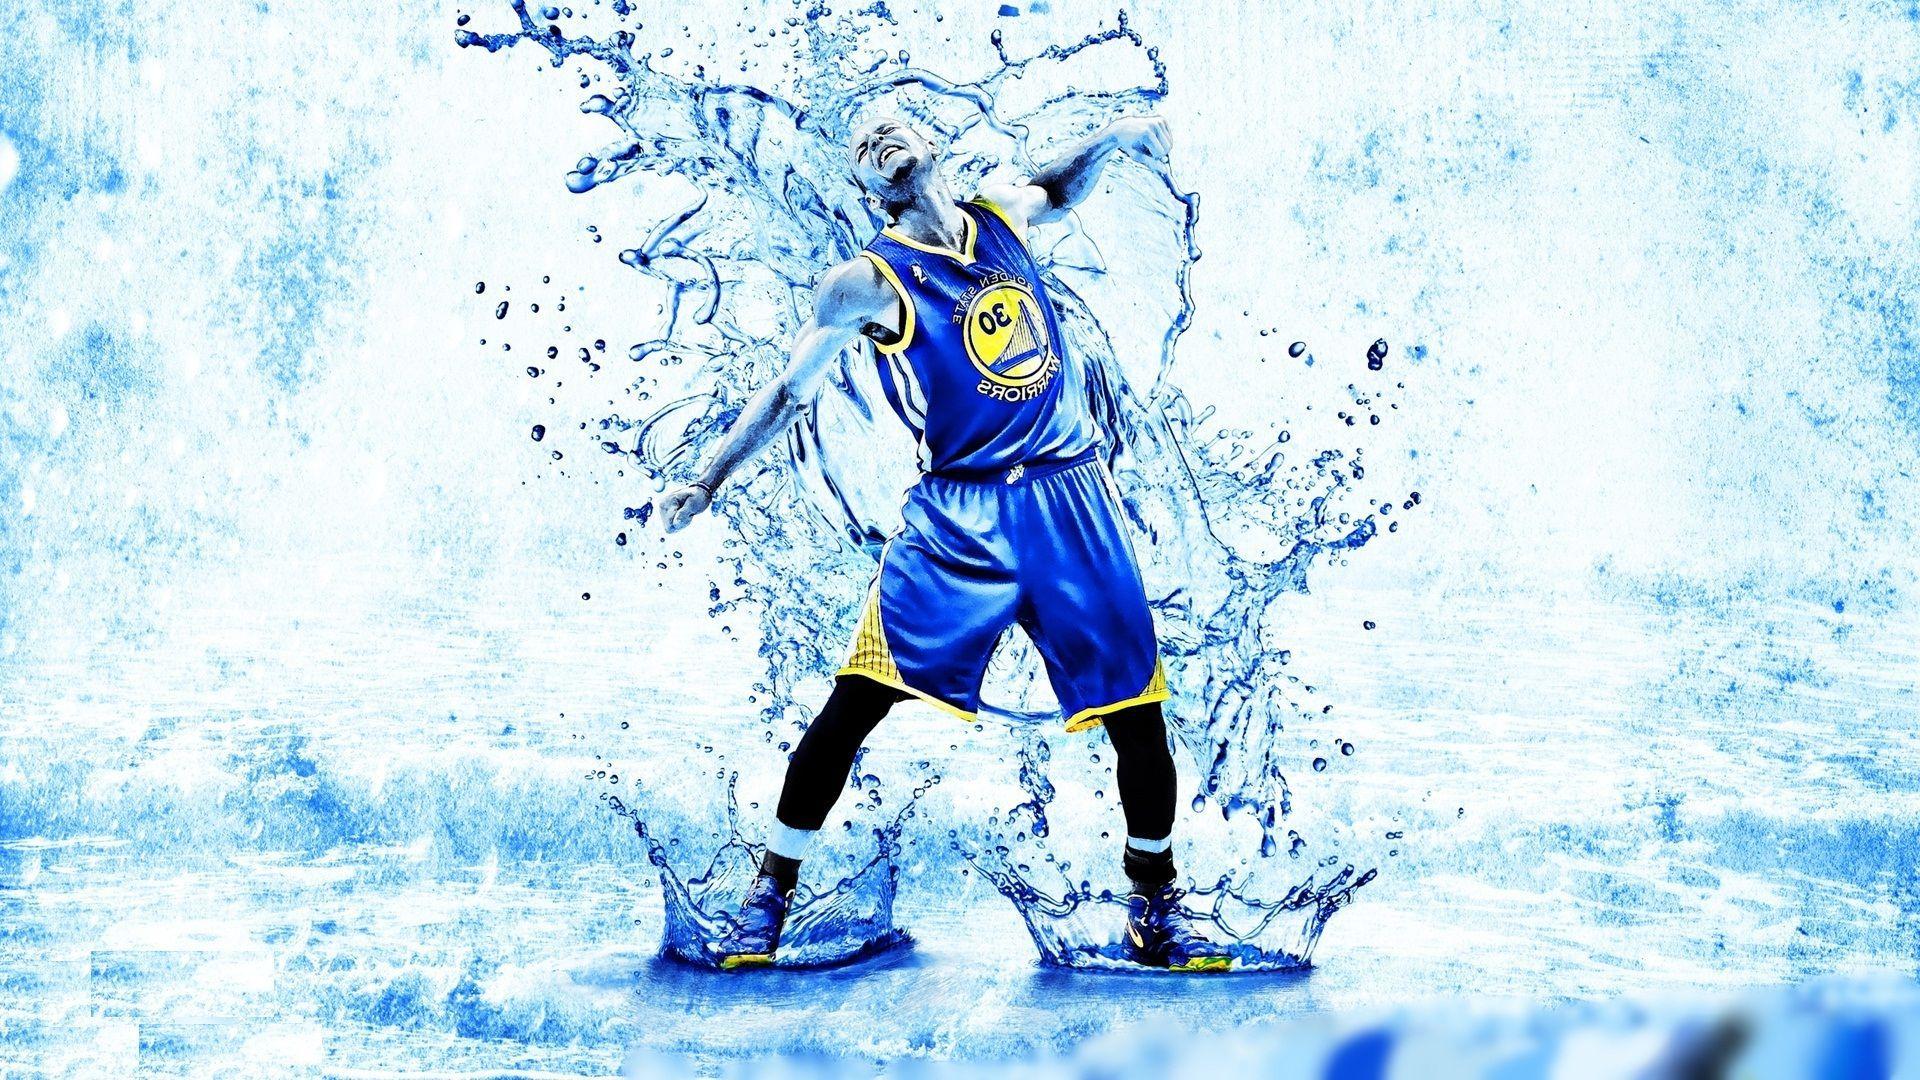 Stephen Curry Ps3 Background Wallpaper HD. Stephen curry